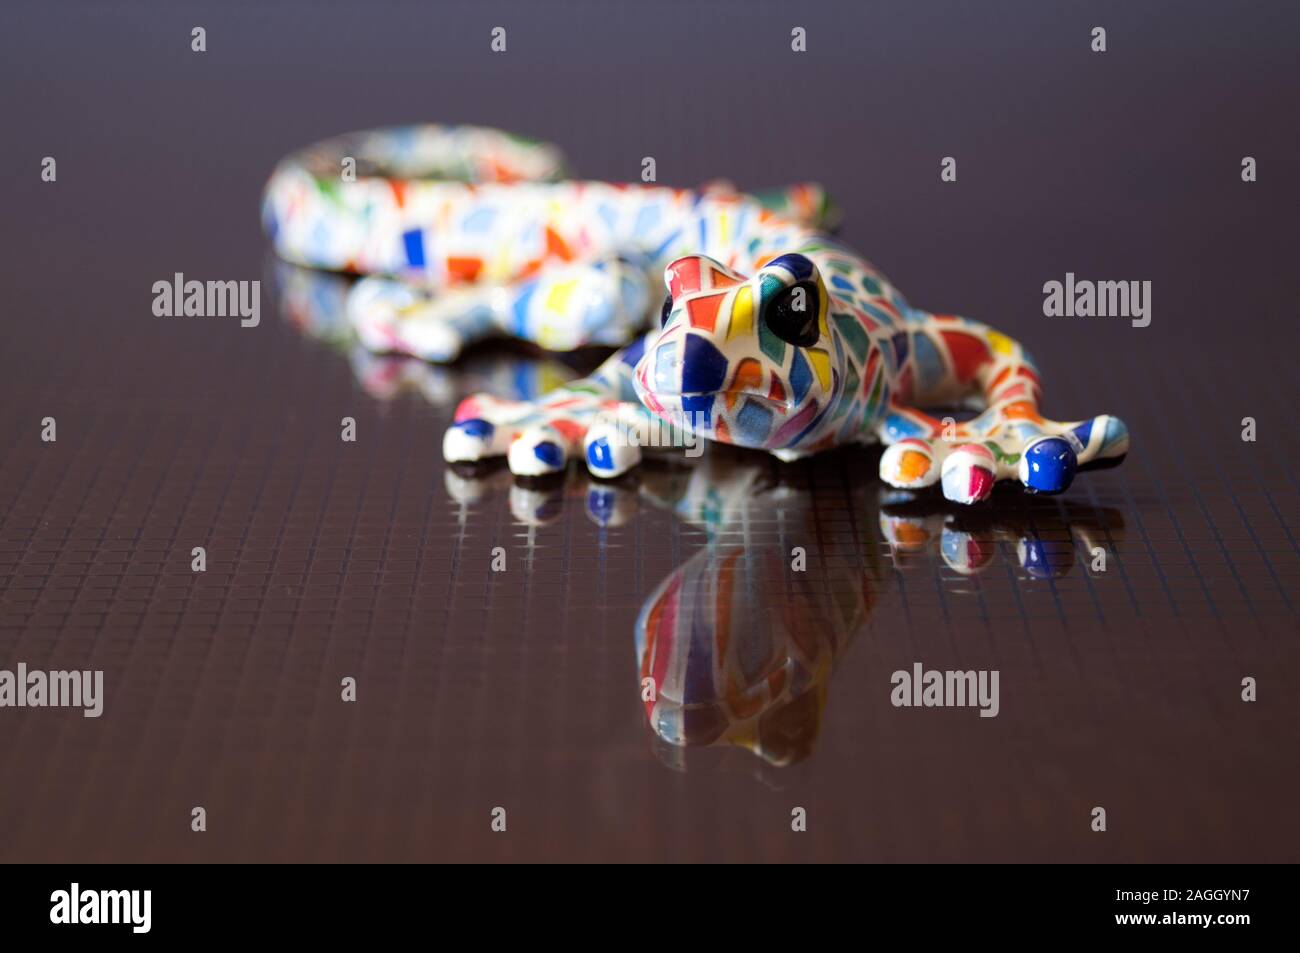 colorful designer lizard on a glass table. Reflex textured glass table. Colourful ceramic model salamander. Stock Photo